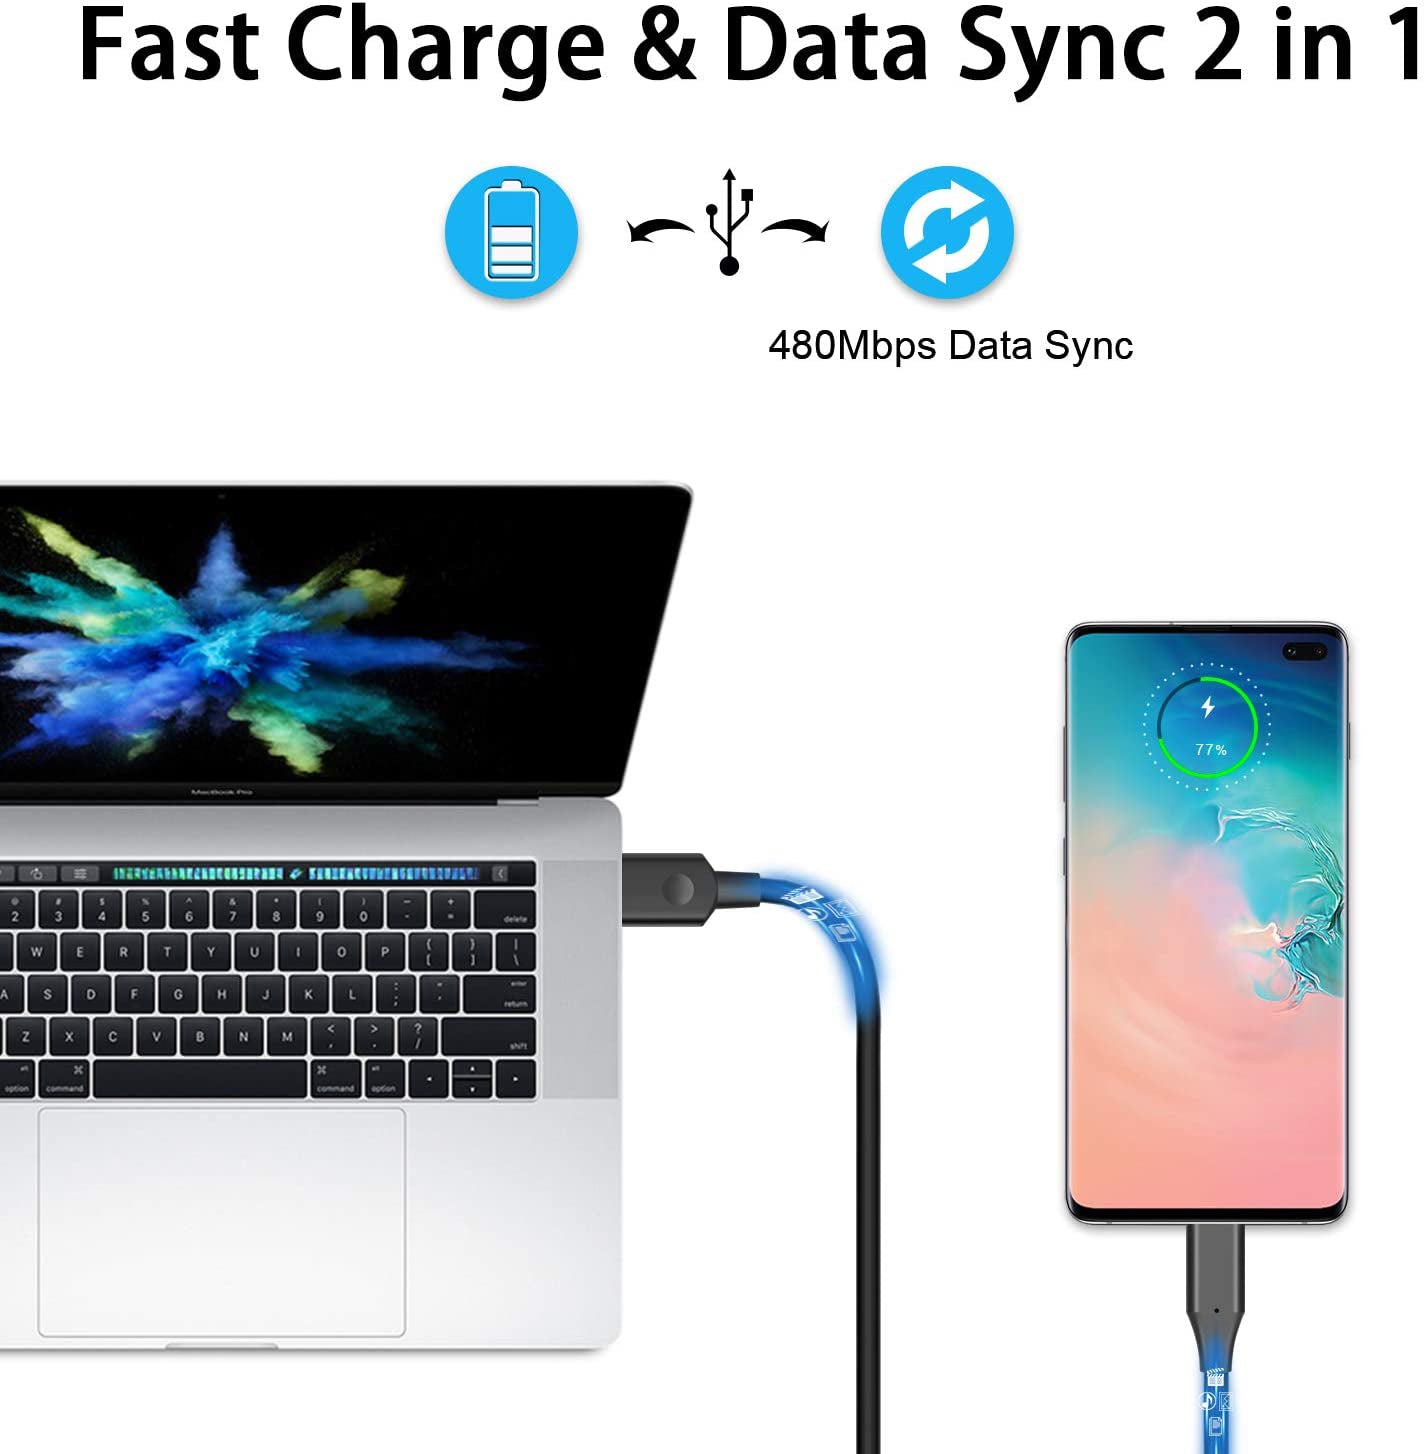 3ft, 6ft and 10ft Long USB-C Cable, High Speed Sync Power Wire TYPE-C Cord Fast Charge - NWY80